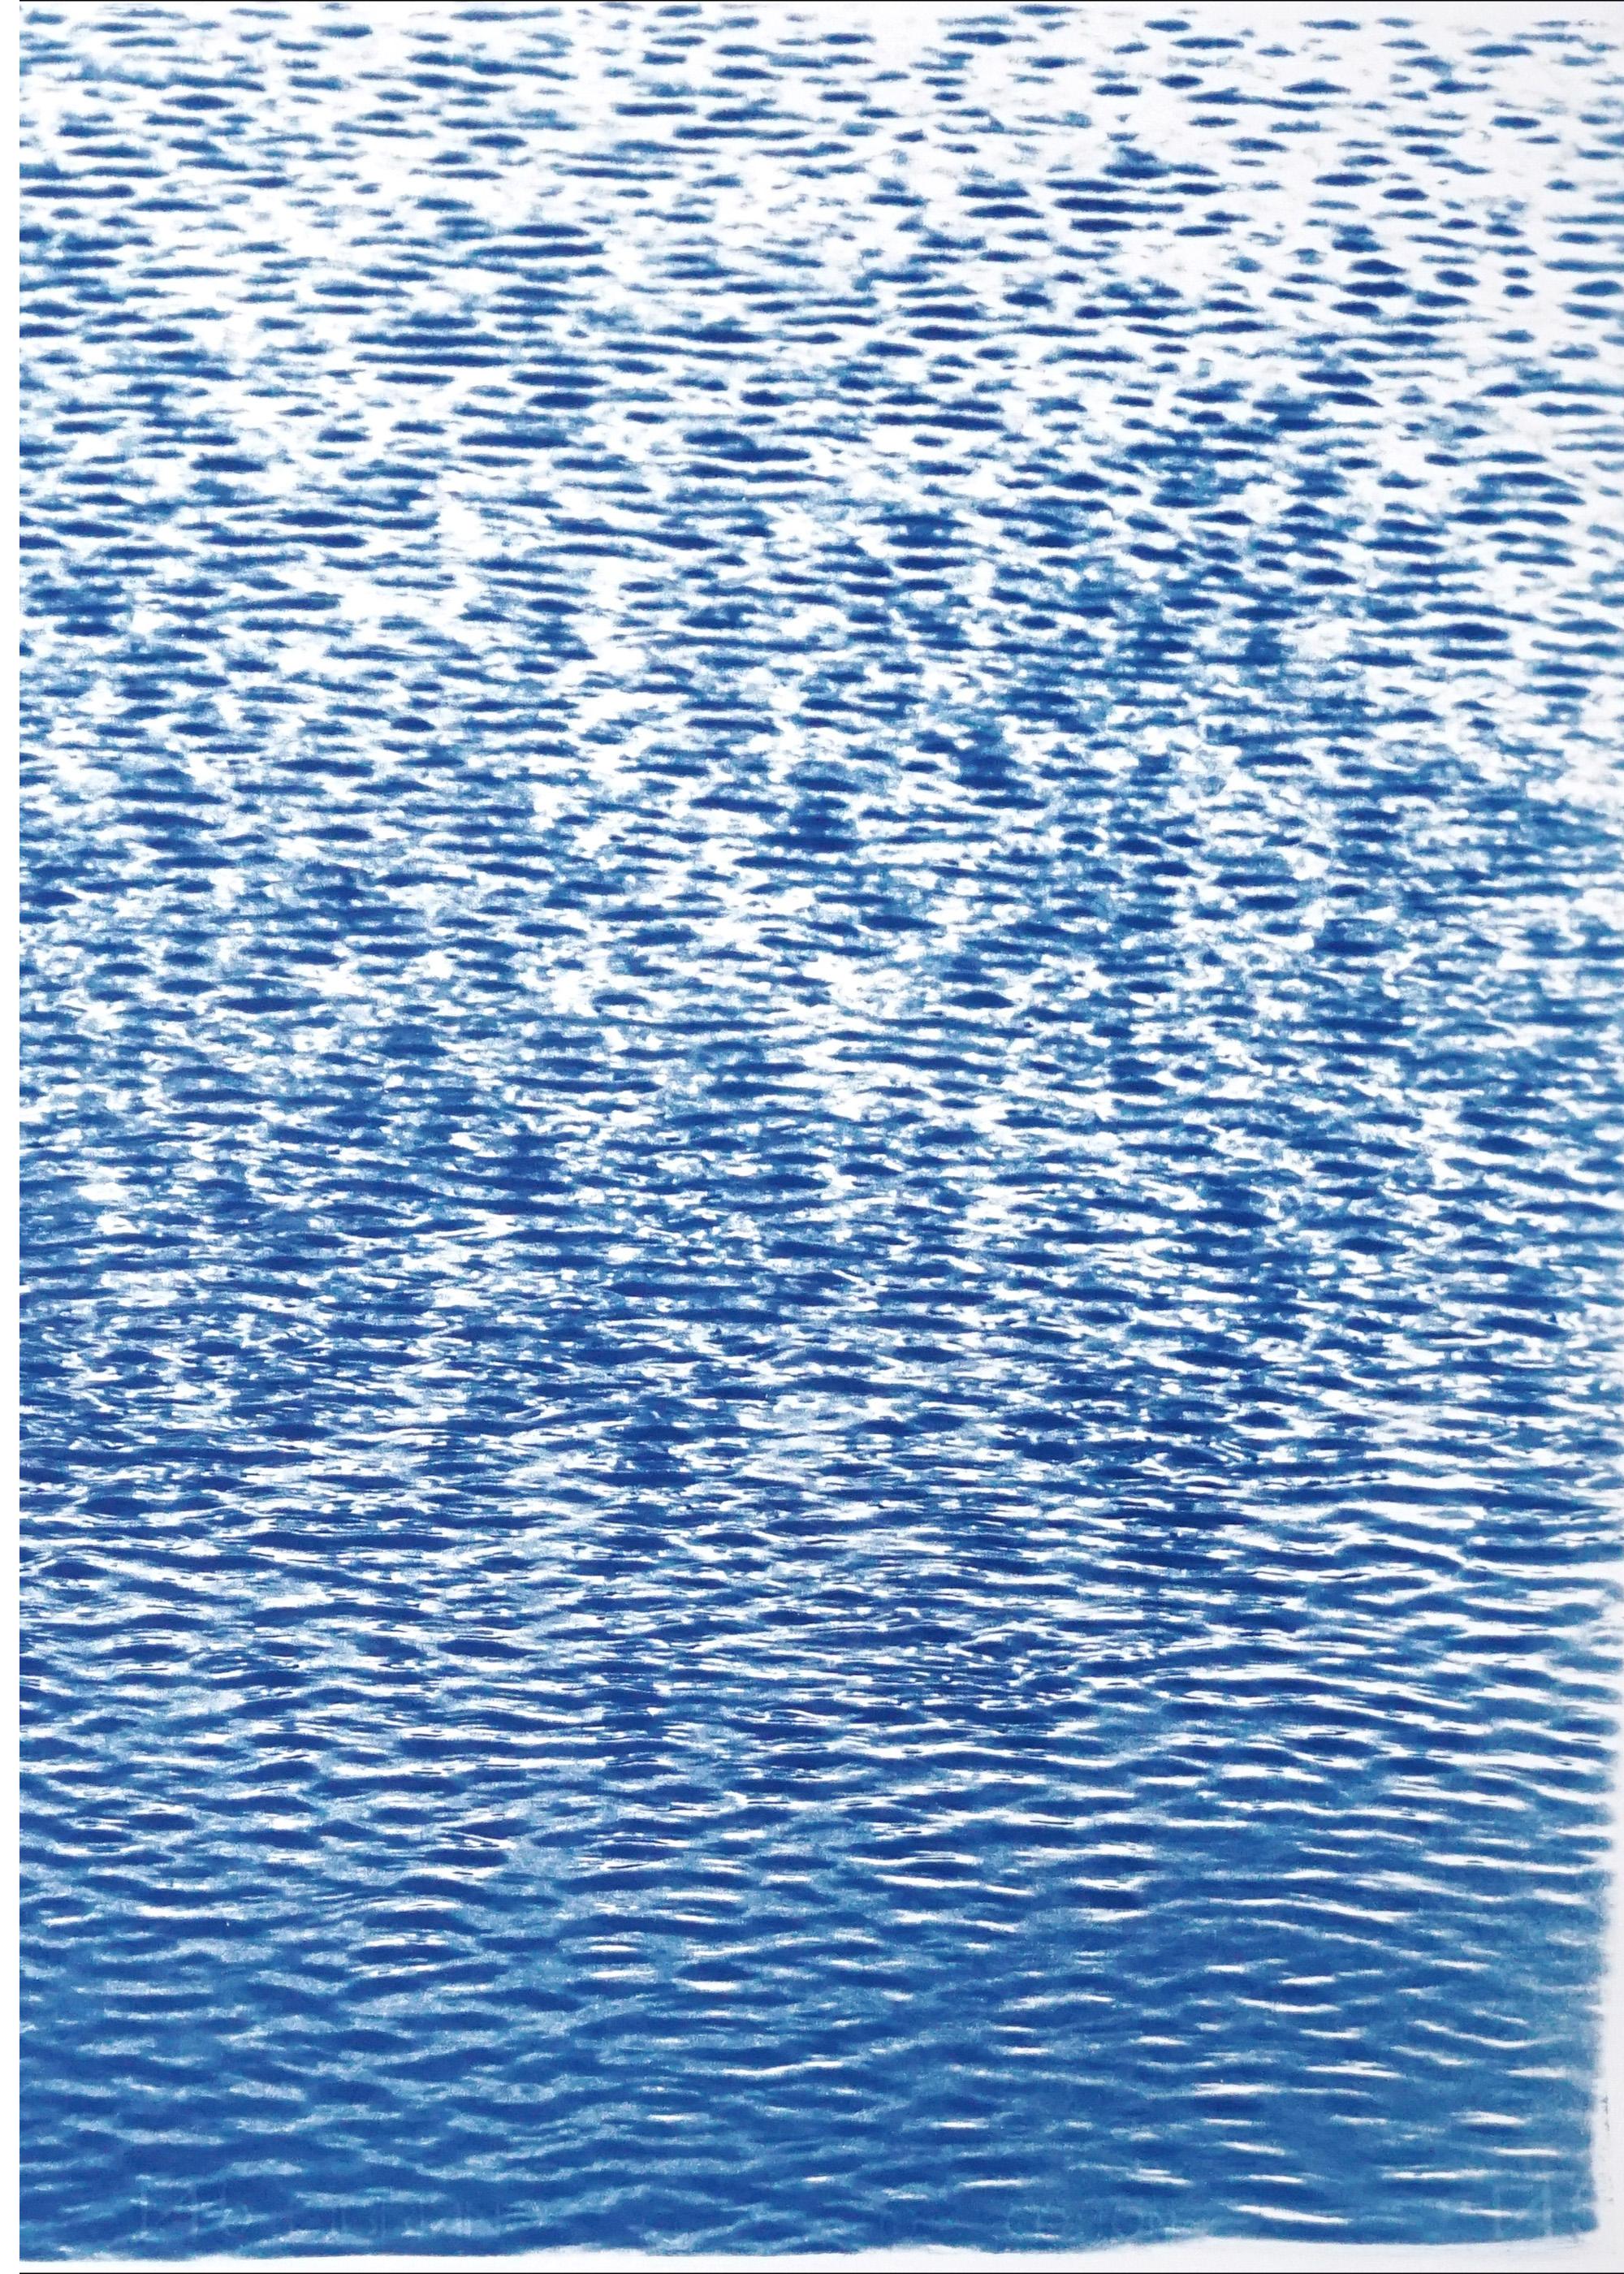 Serene Cove Ripples, Mediterranean Seascape Diptych in Blue & White, Cyanotype For Sale 1